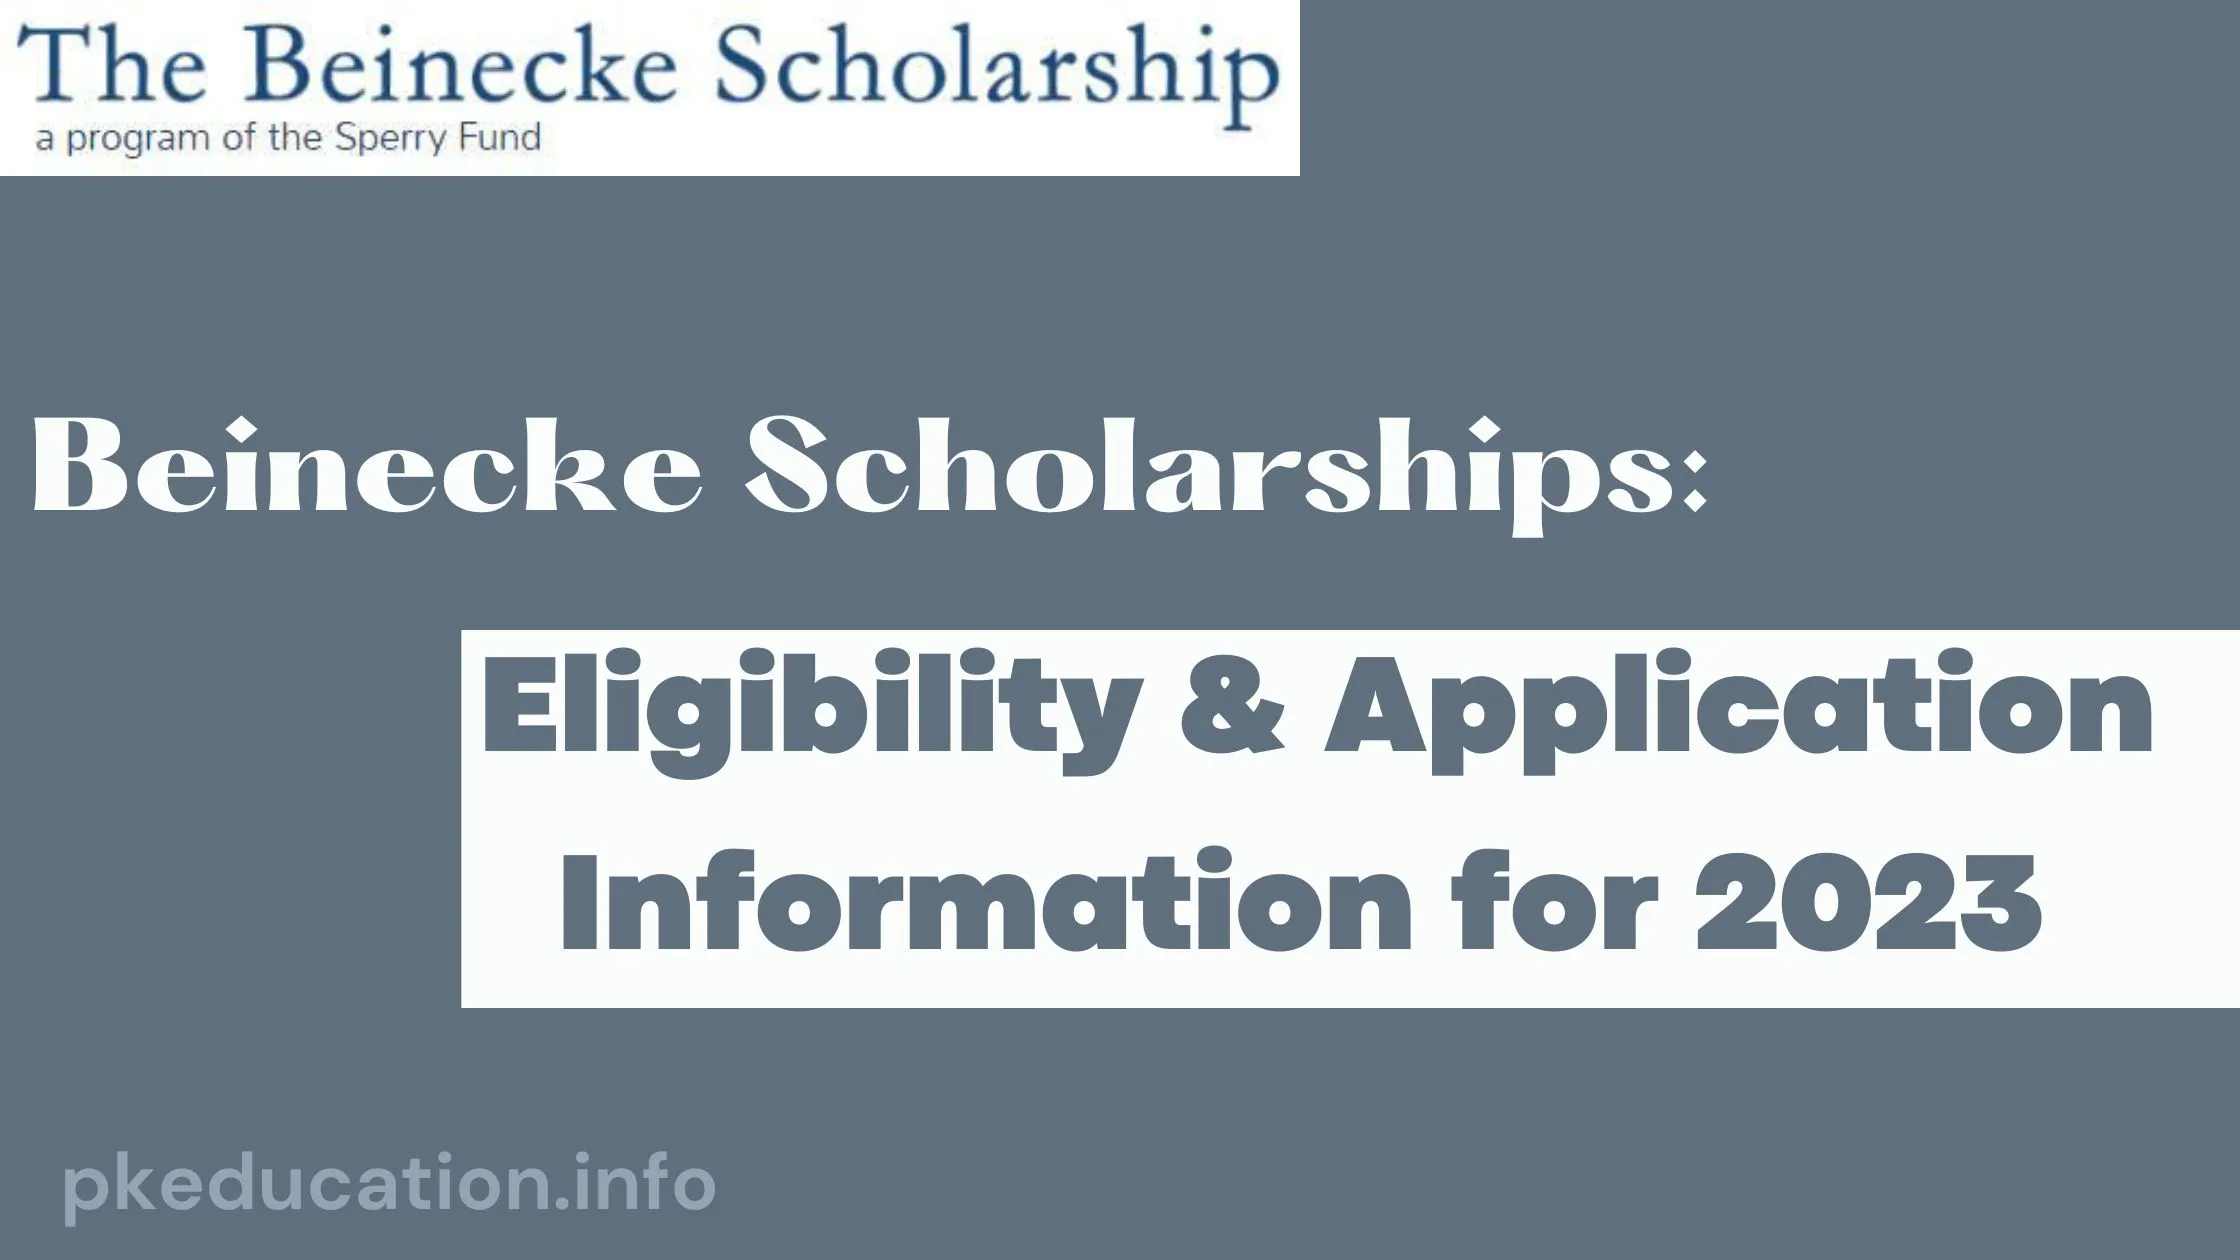 Beinecke Scholarships: Eligibility & Application Information for 2023